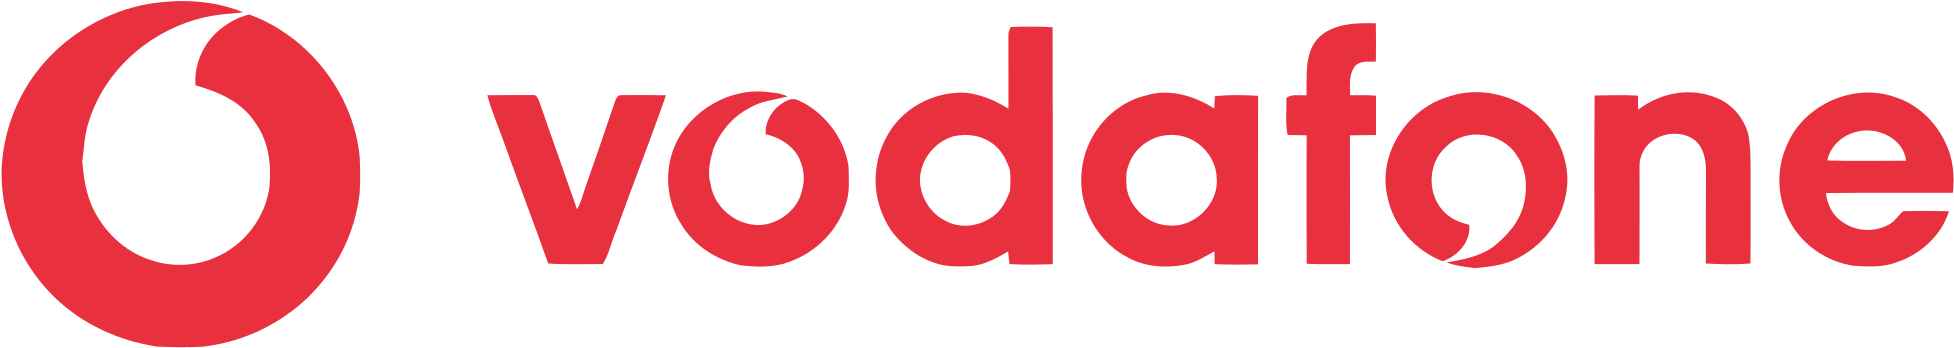 Vodafone Png 1954 X 348